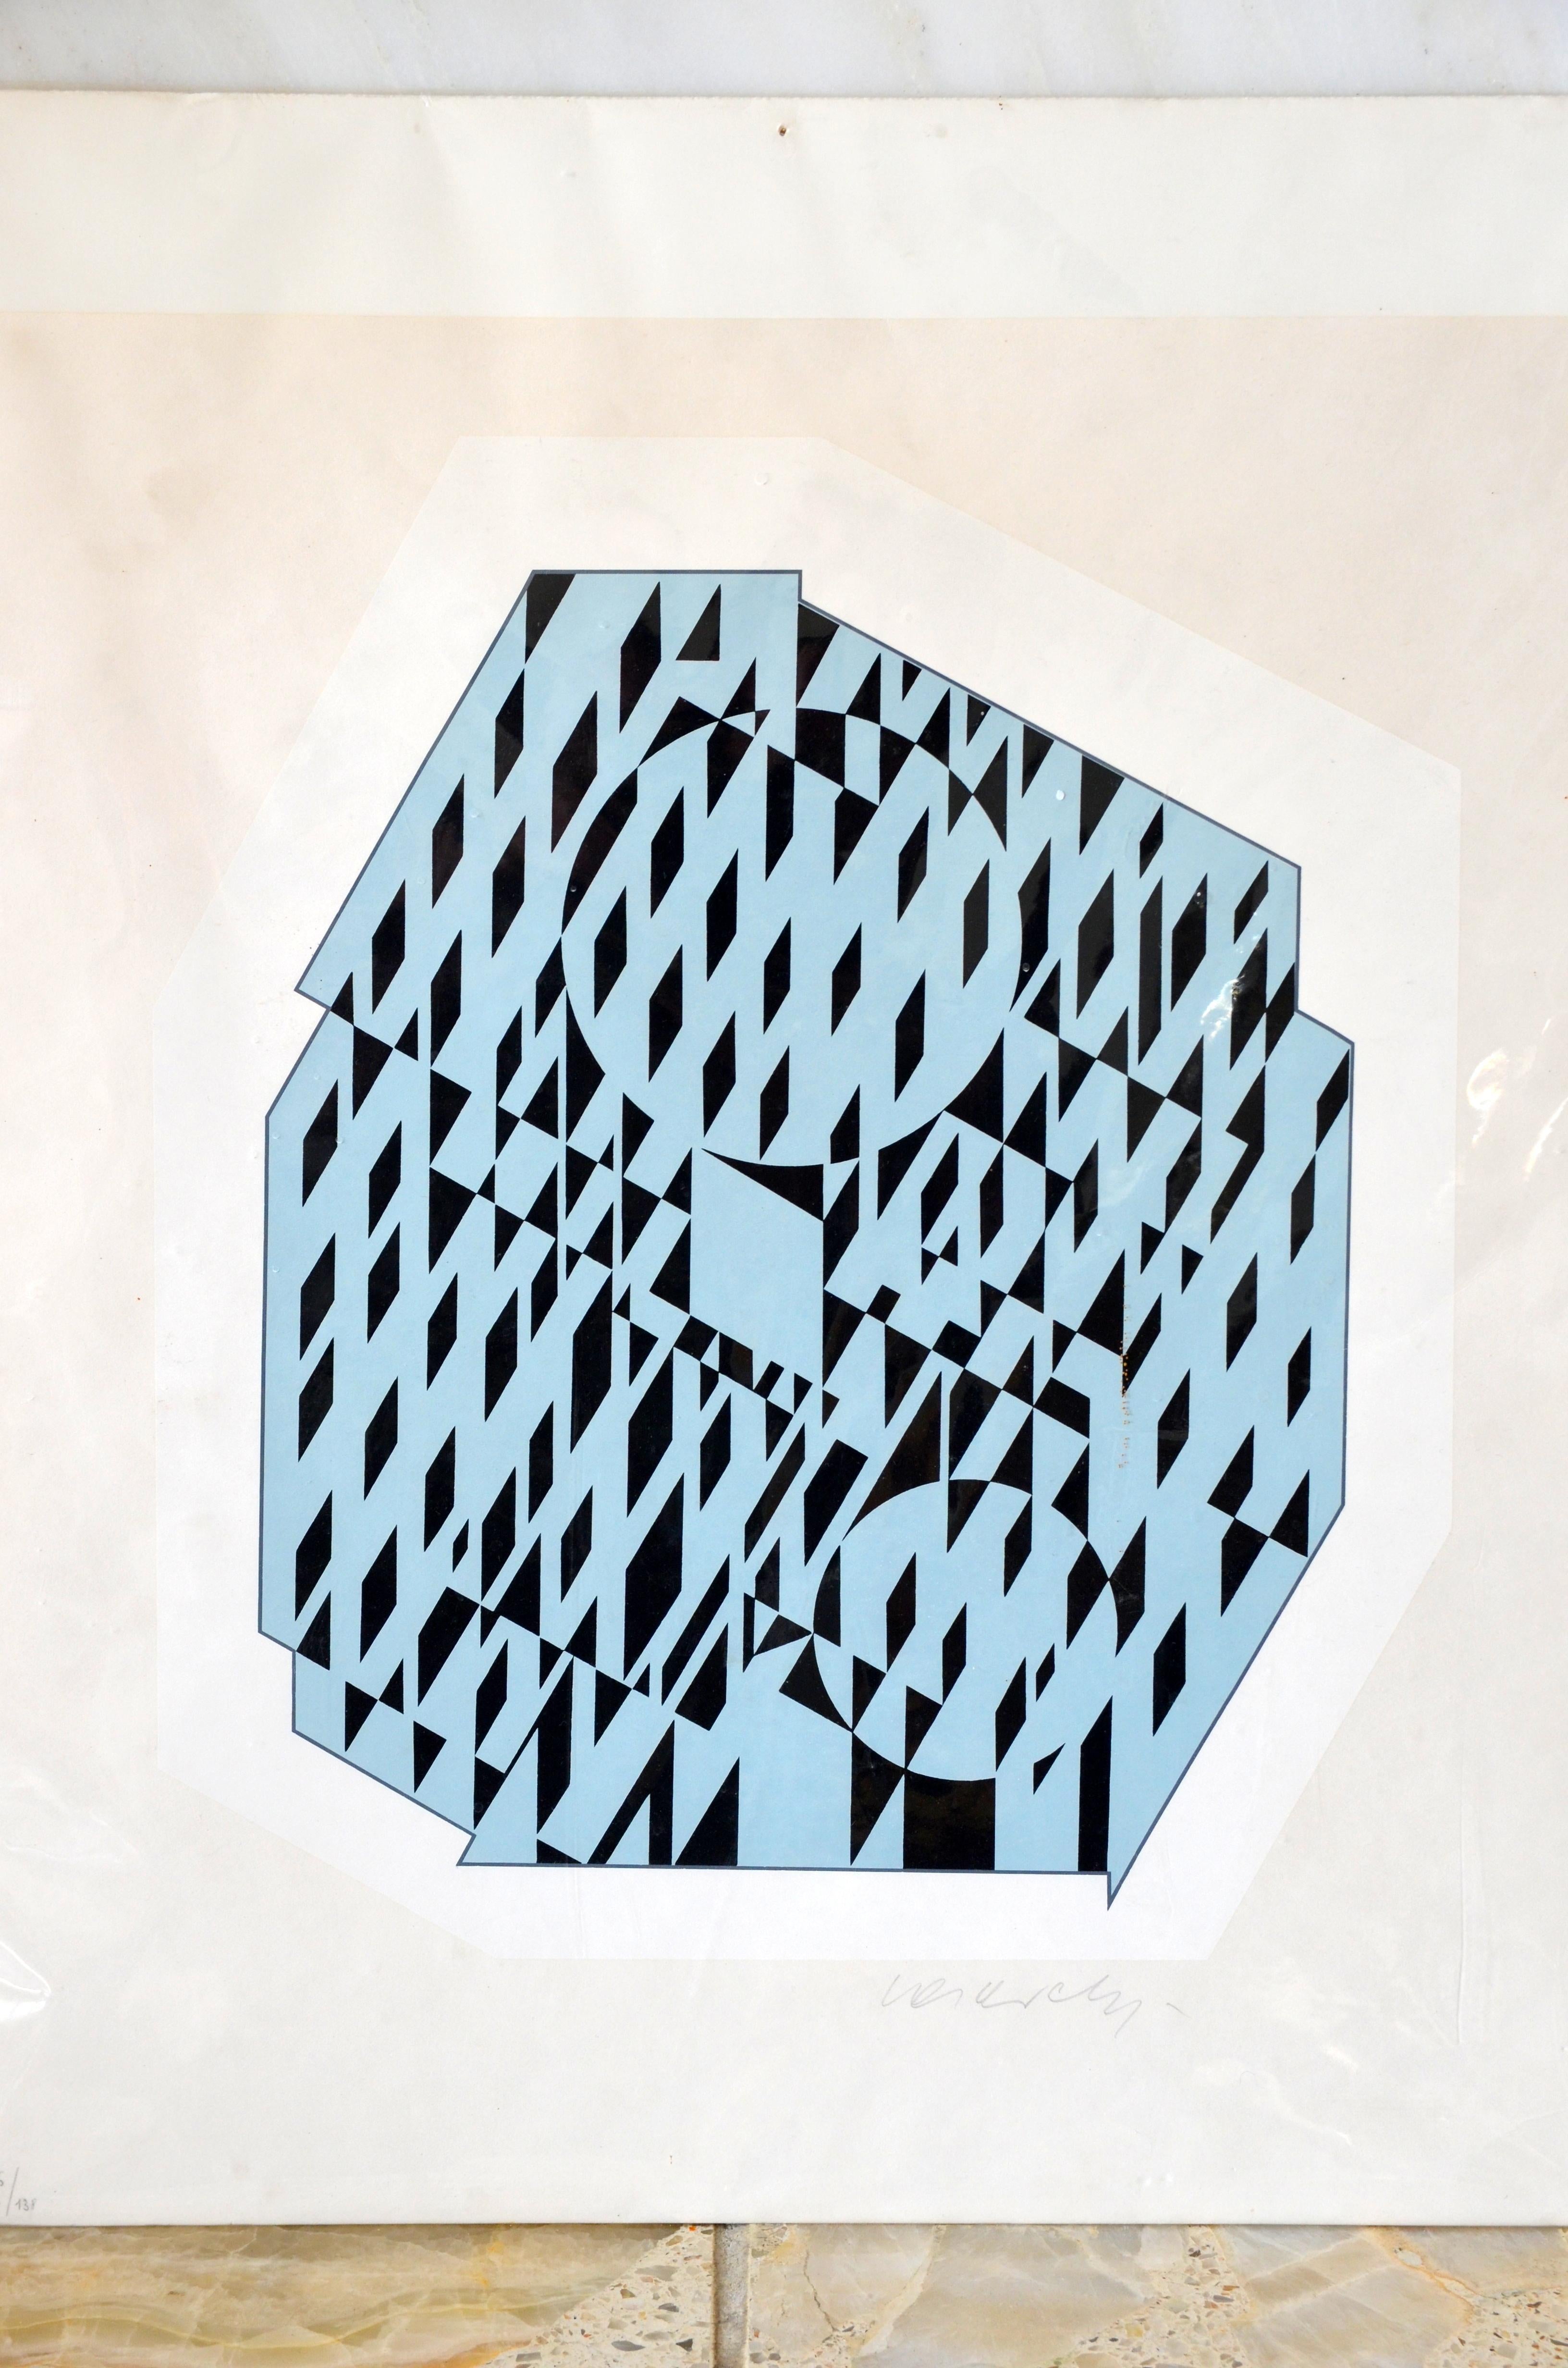 Nethe, signed and numbered silkscreen print by Victor Vasarely.

Hand signed and numbered 96/138 by the artist. Original silkscreen in color on paper. Edition of 138. Printed at Atelier Broutelles et Launay, 1969.

Issued in the series: